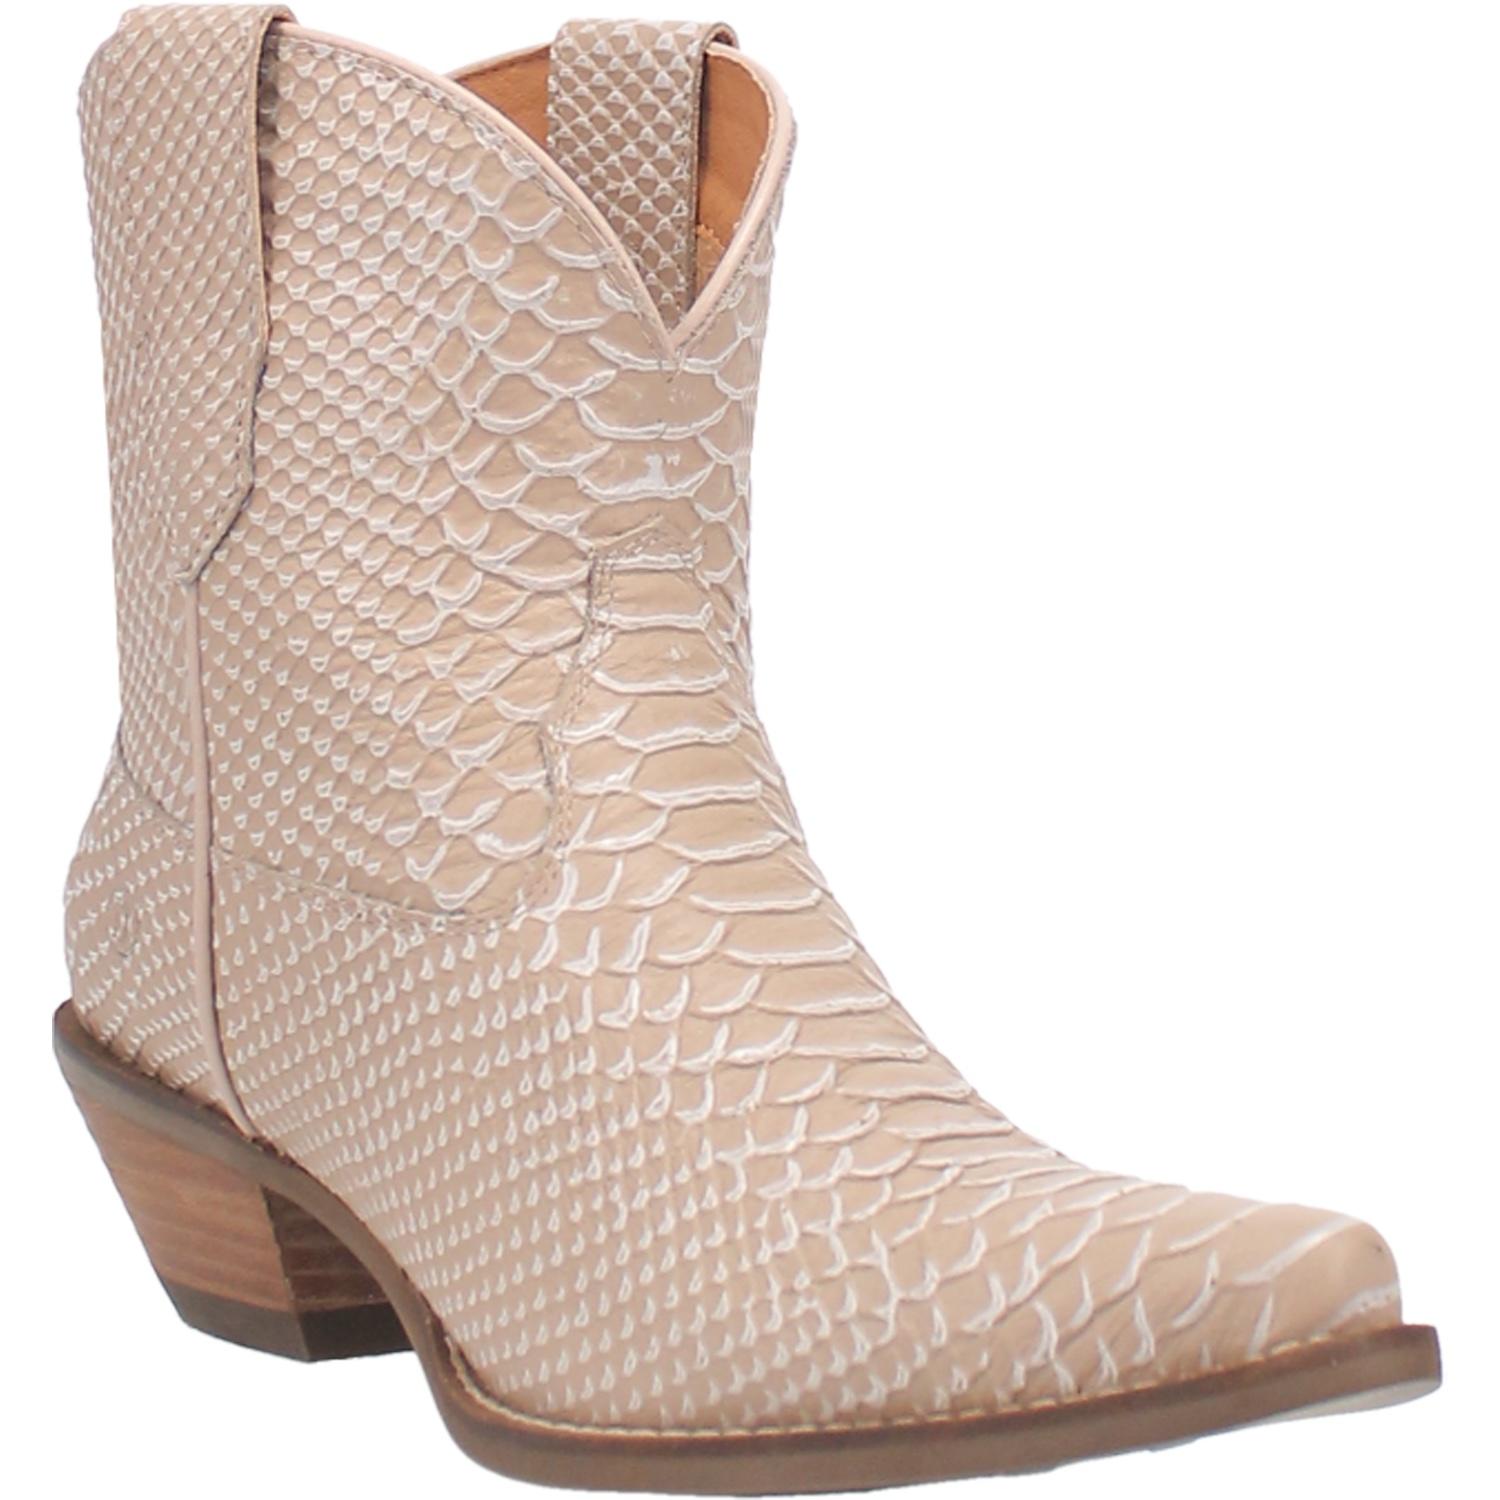 Small booties in a sand color with a reptile skin finish. Has a V cut at the top, a short heel, and matching leather straps. Item is pictured on a plain white background